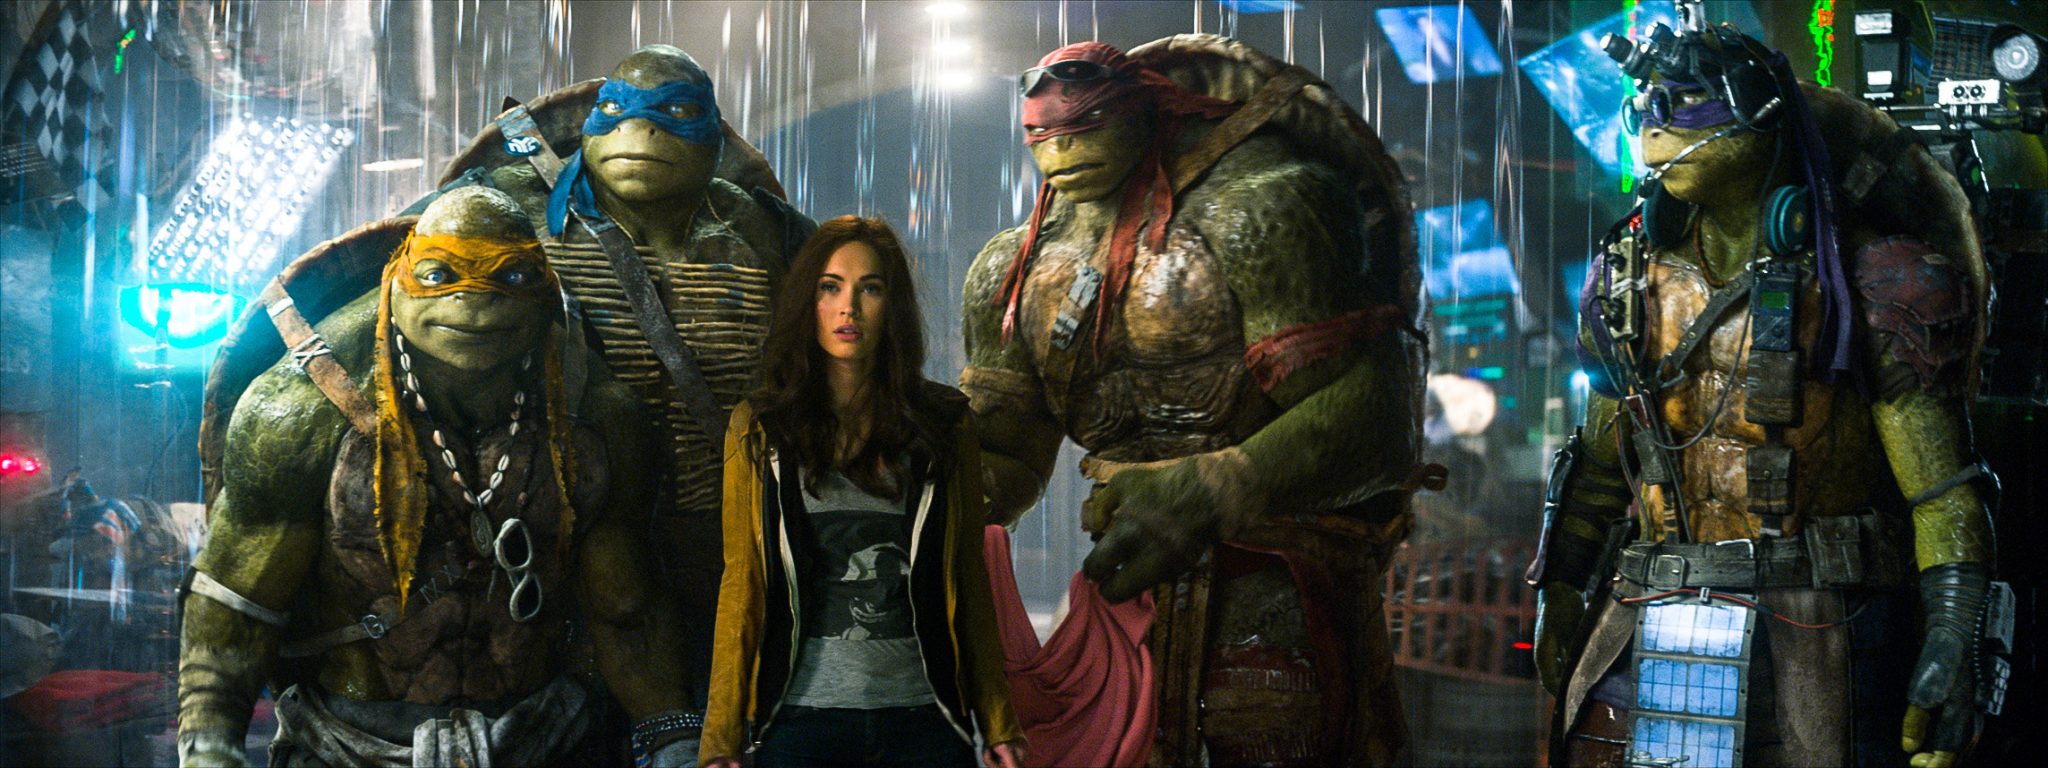 How Old Are The Turtles In Tmnt 2014